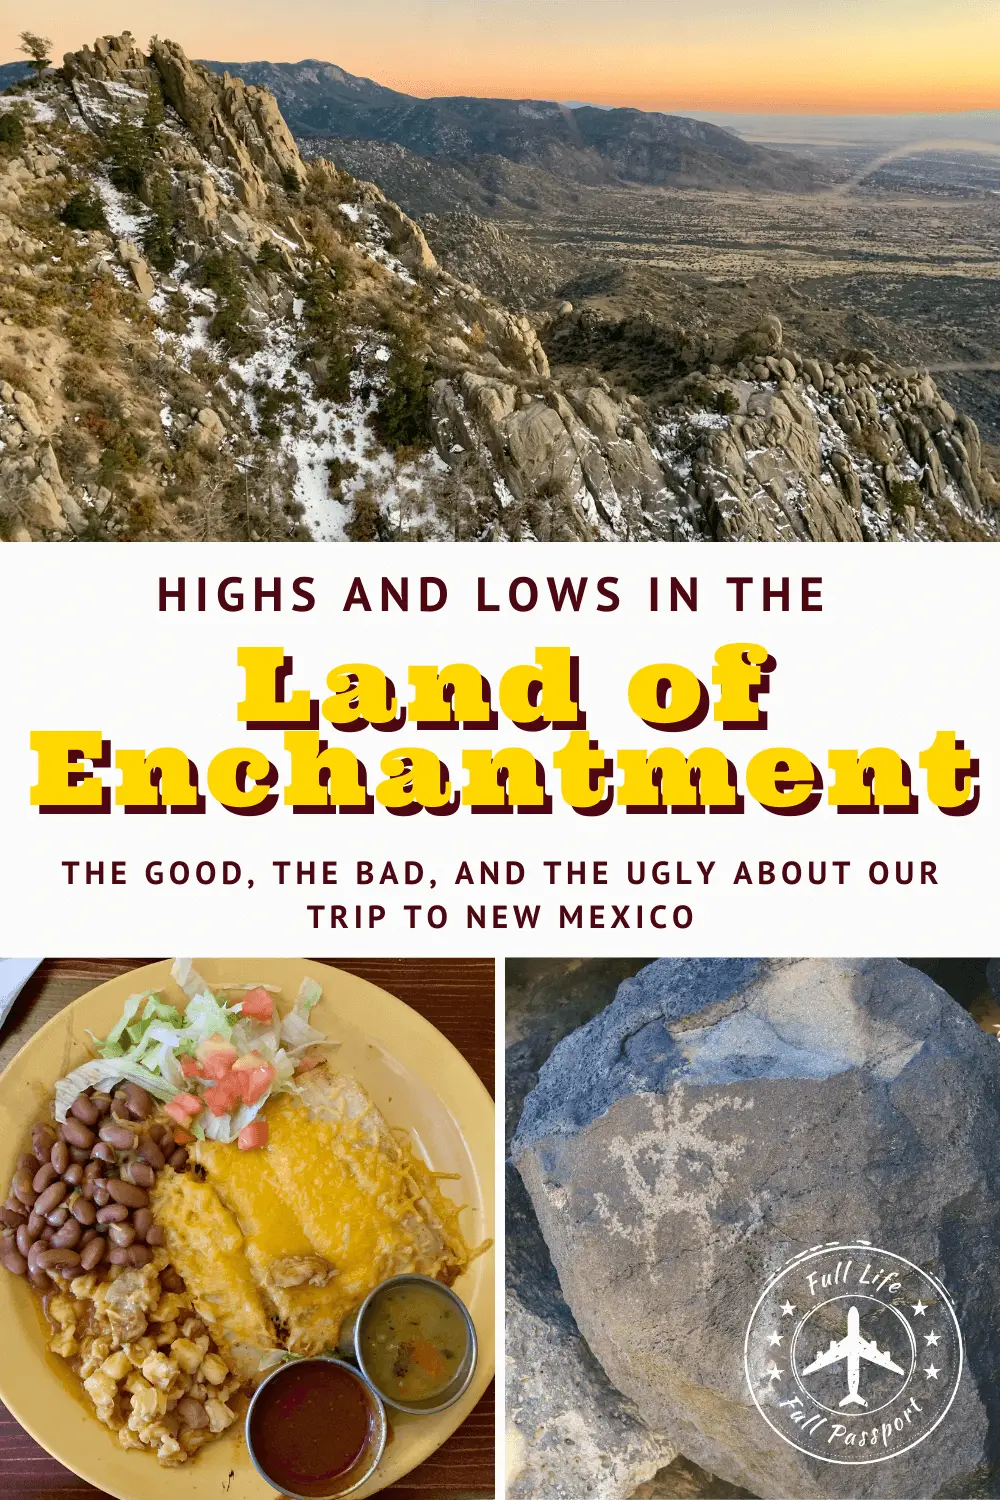 Highs and Lows in the Land of Enchantment